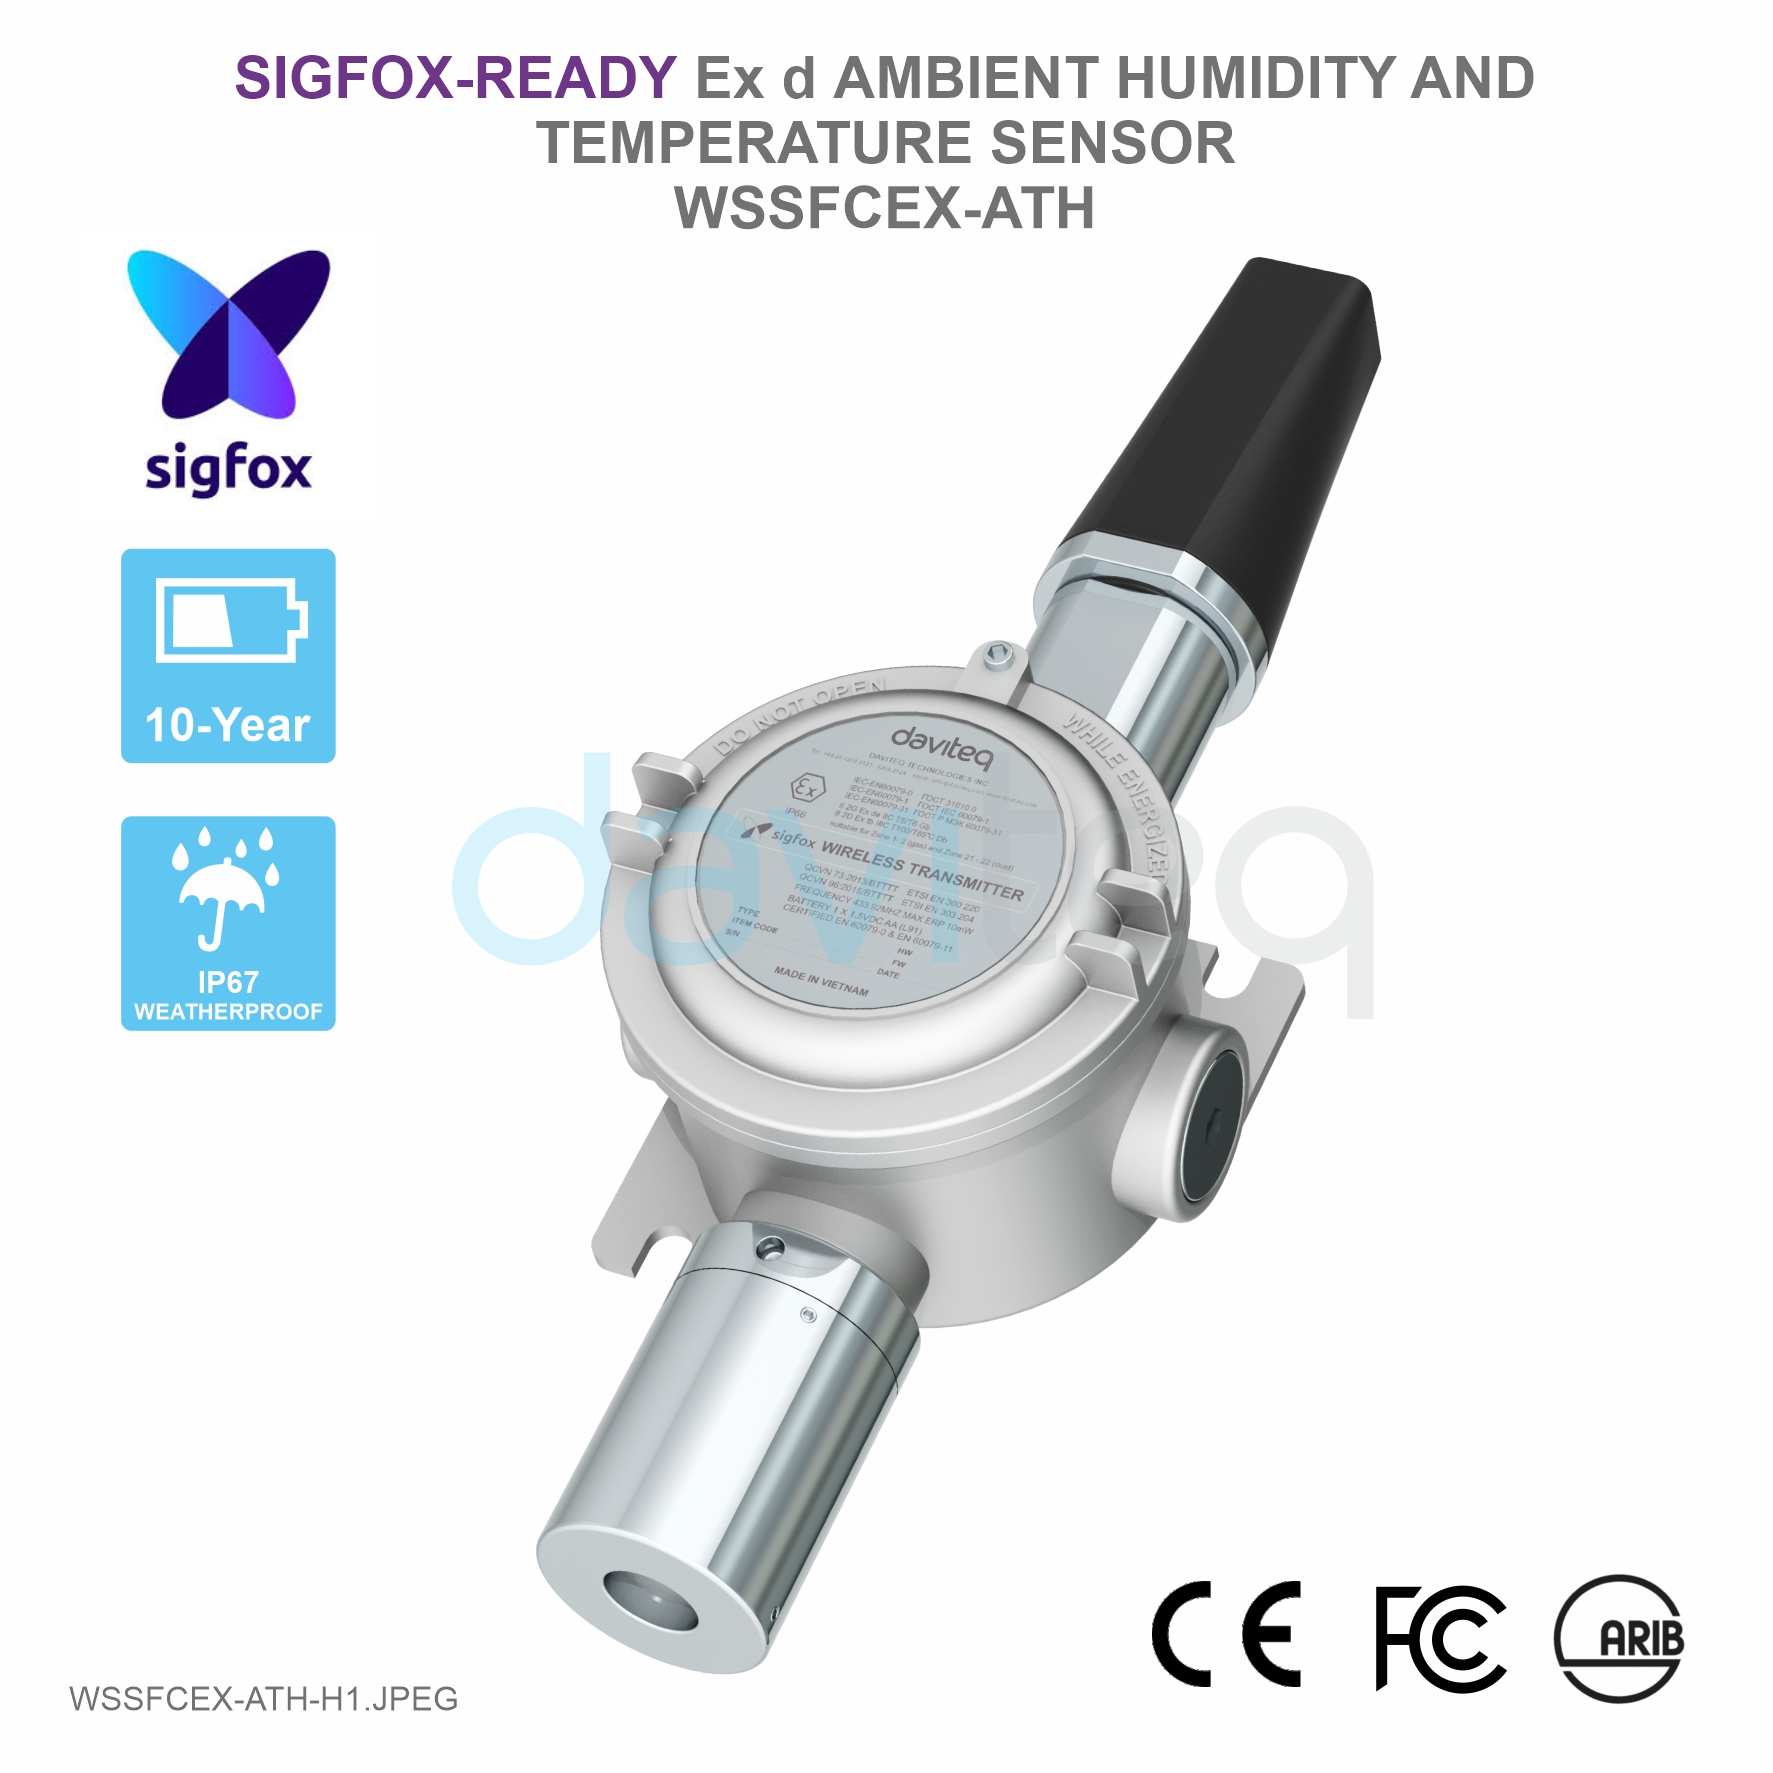 Sigfox-Ready Ex d approved Ambient Humidity and Temperature sensor